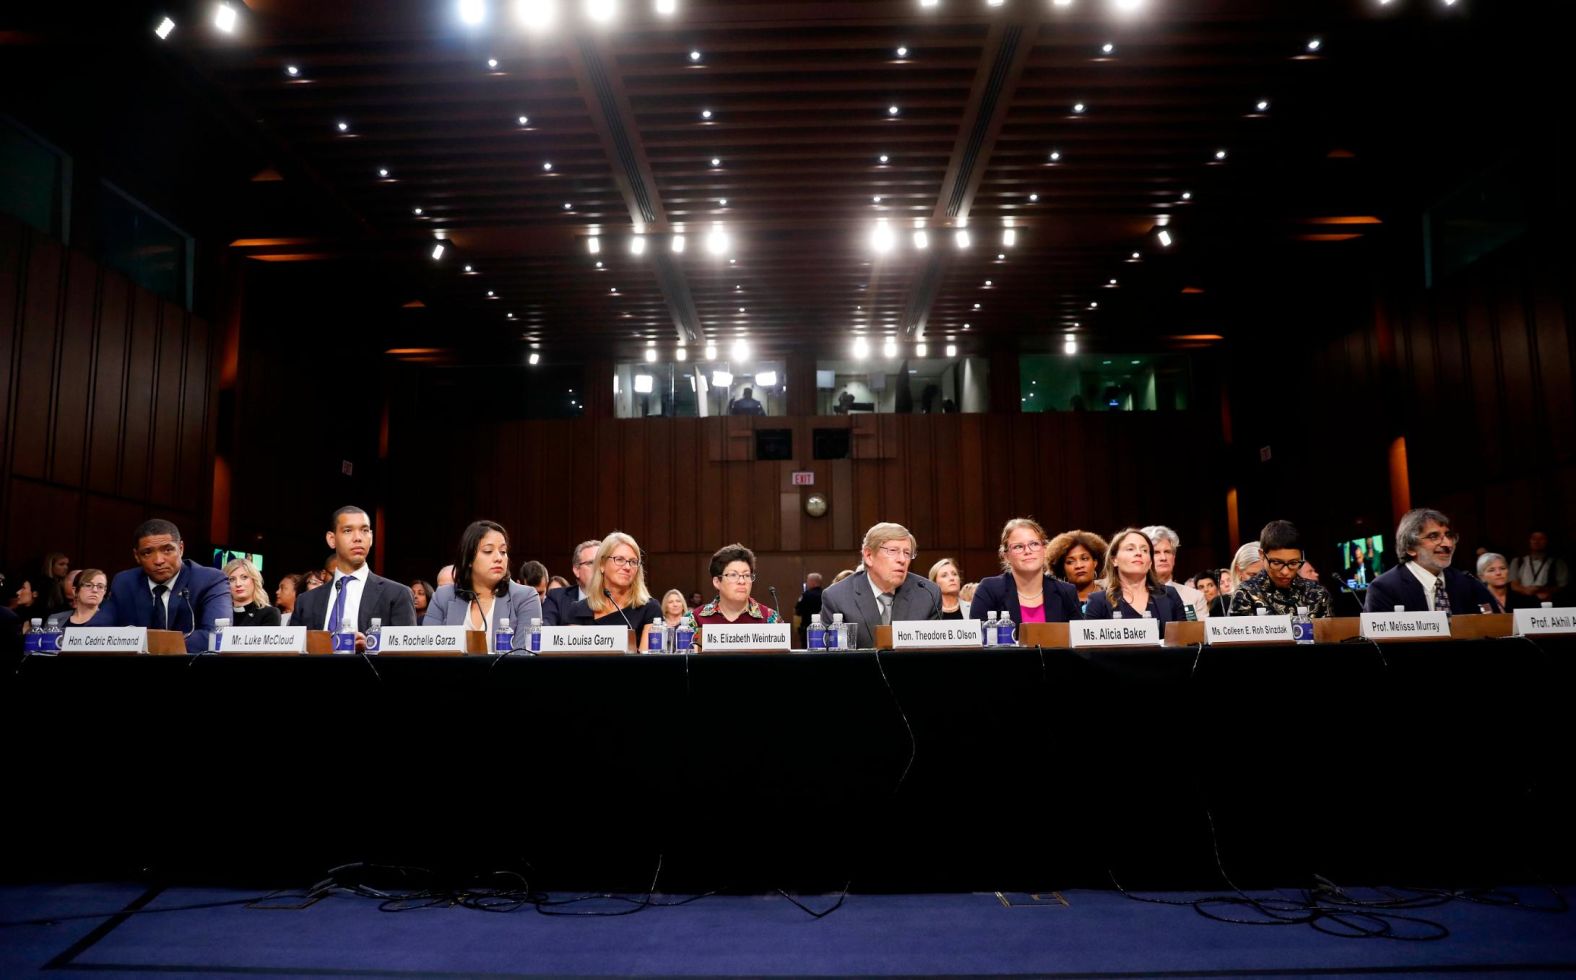 On Friday, the Senate Judiciary Committee heard testimony from various legal experts. Some made cases in favor of Kavanaugh and some made cases against him.